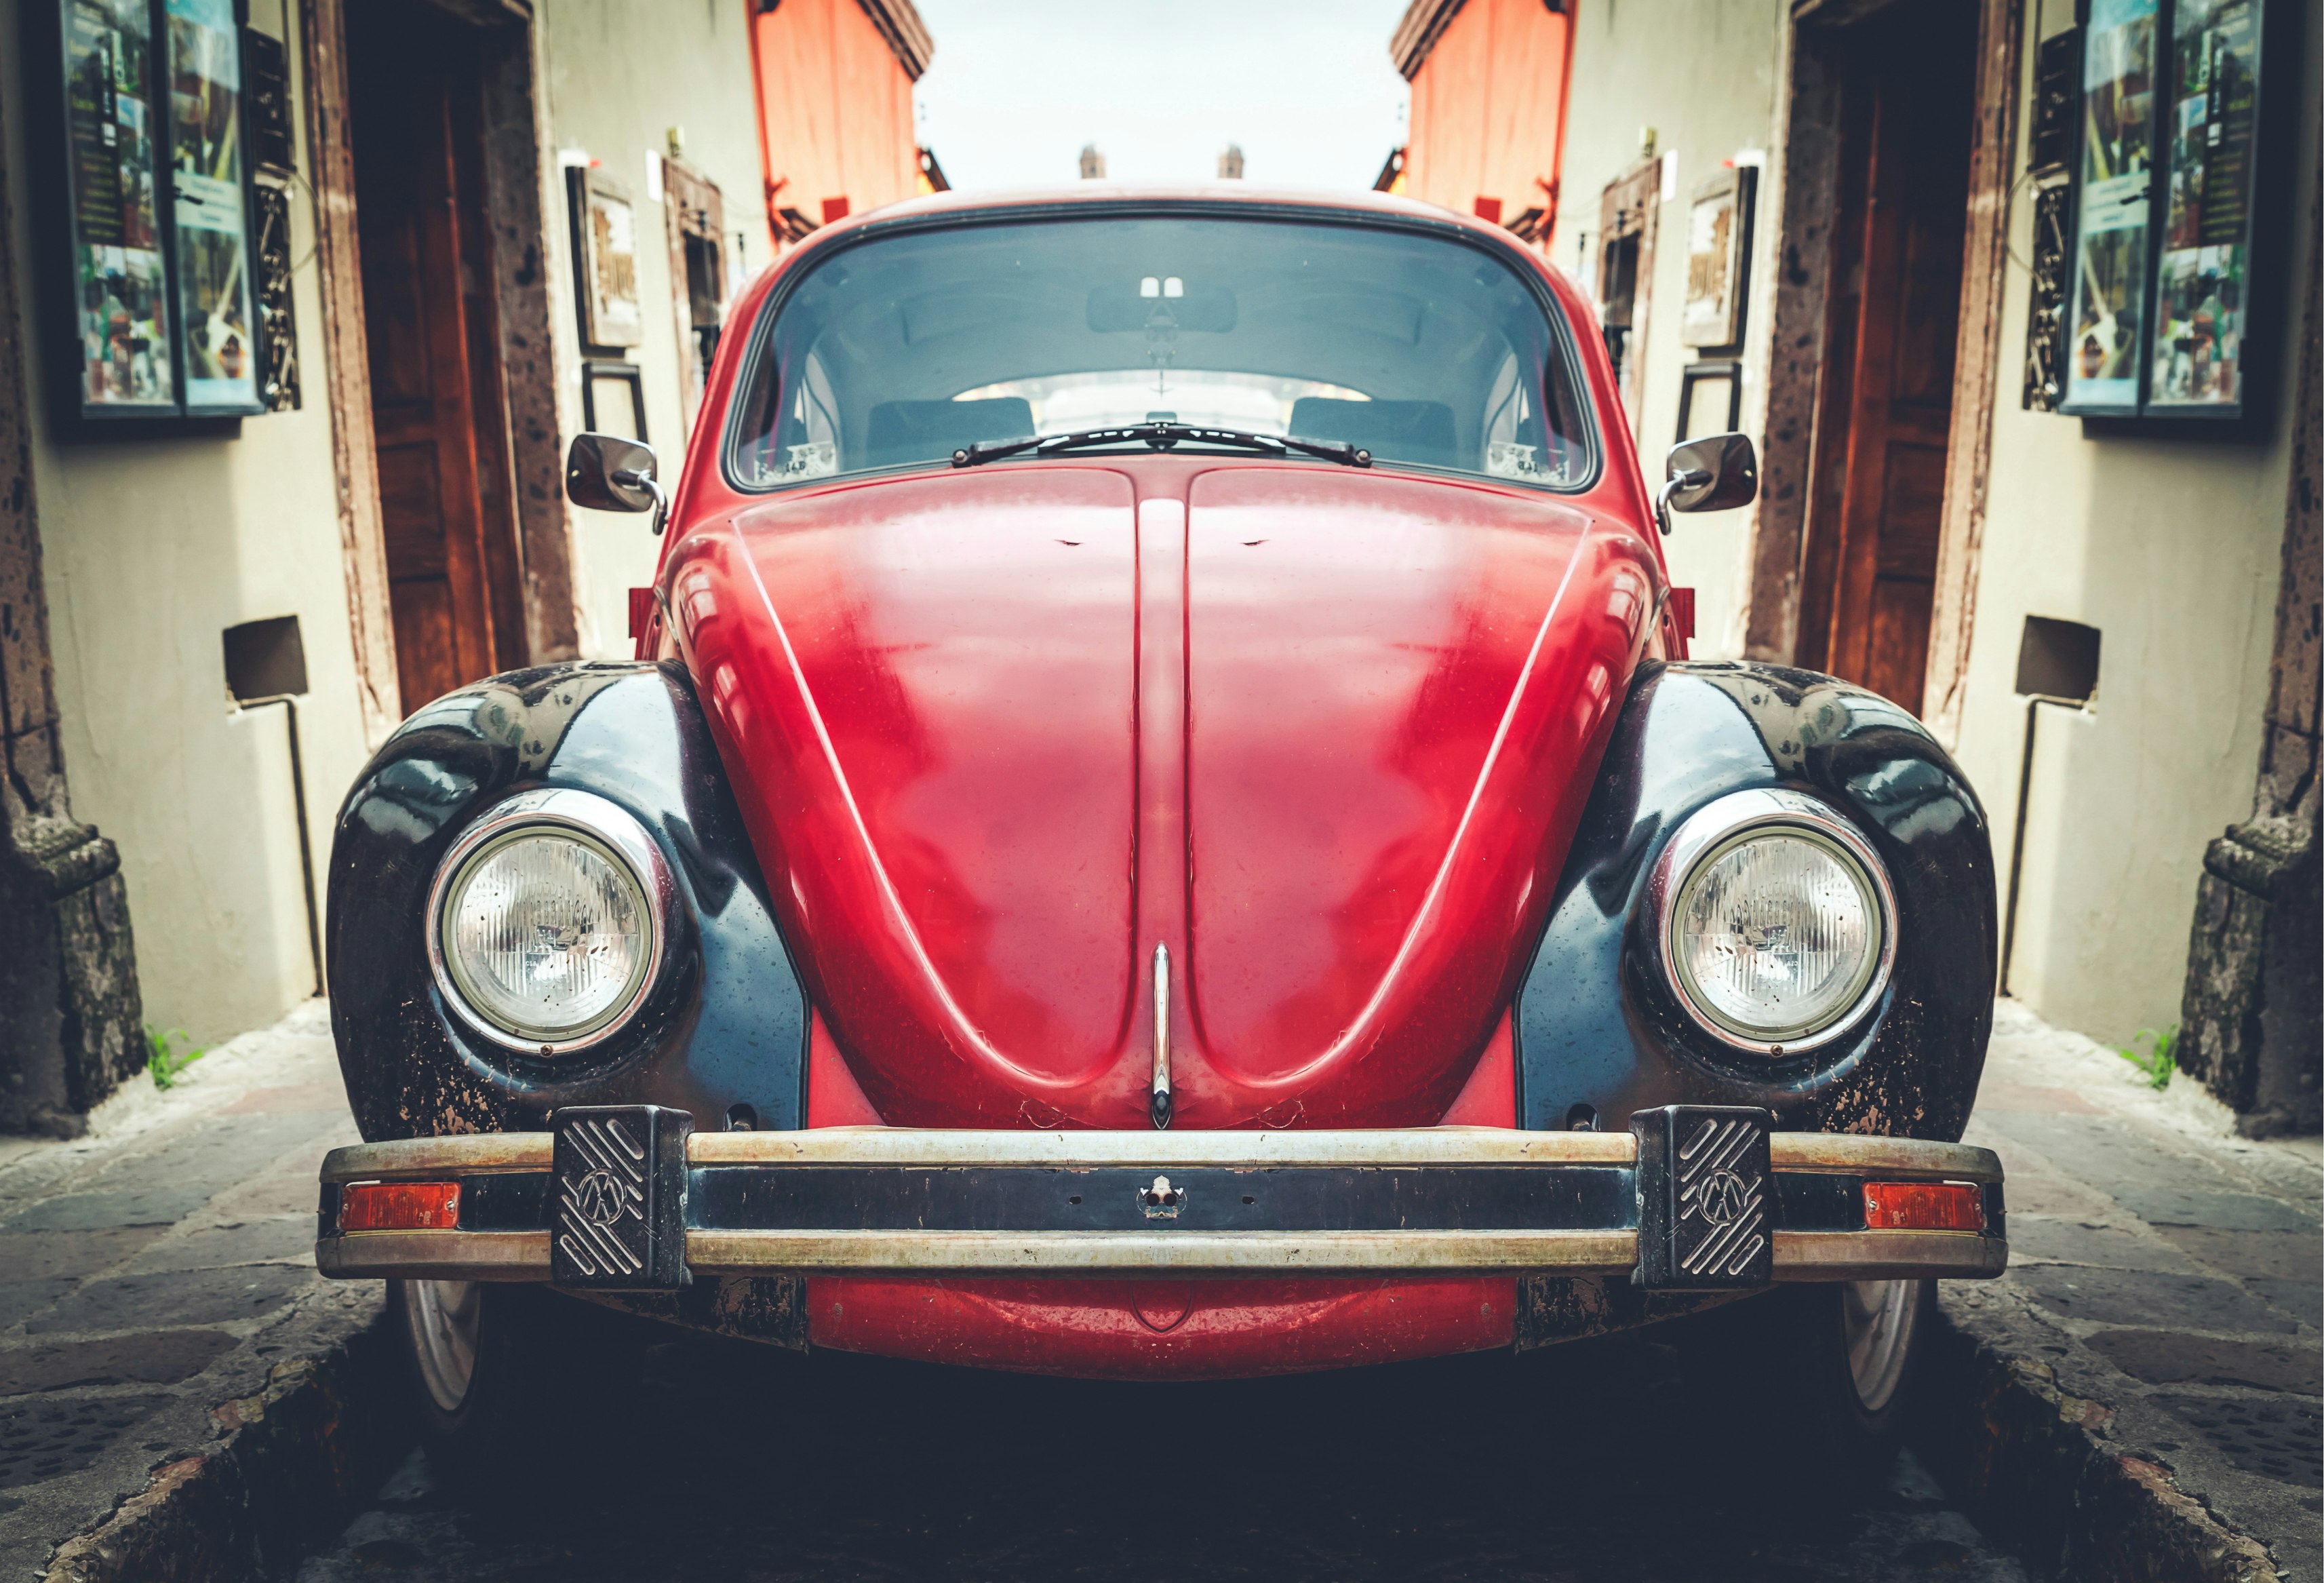 photo of red and black Volkswagen Beetle in alley